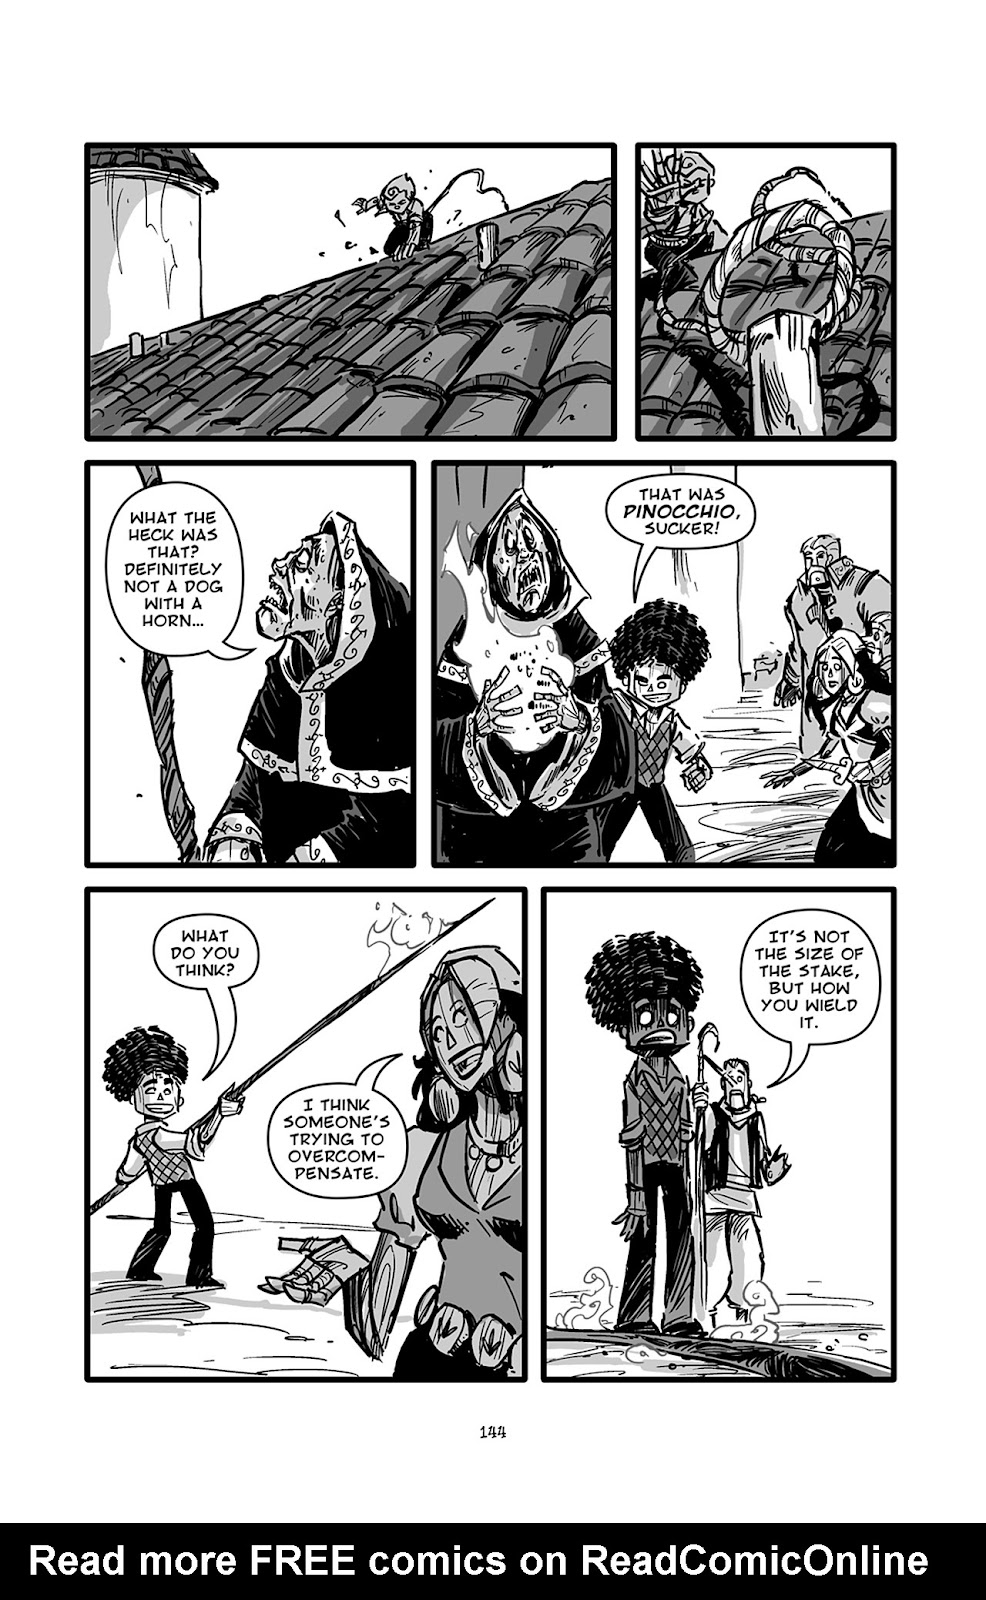 Pinocchio: Vampire Slayer - Of Wood and Blood issue 6 - Page 17